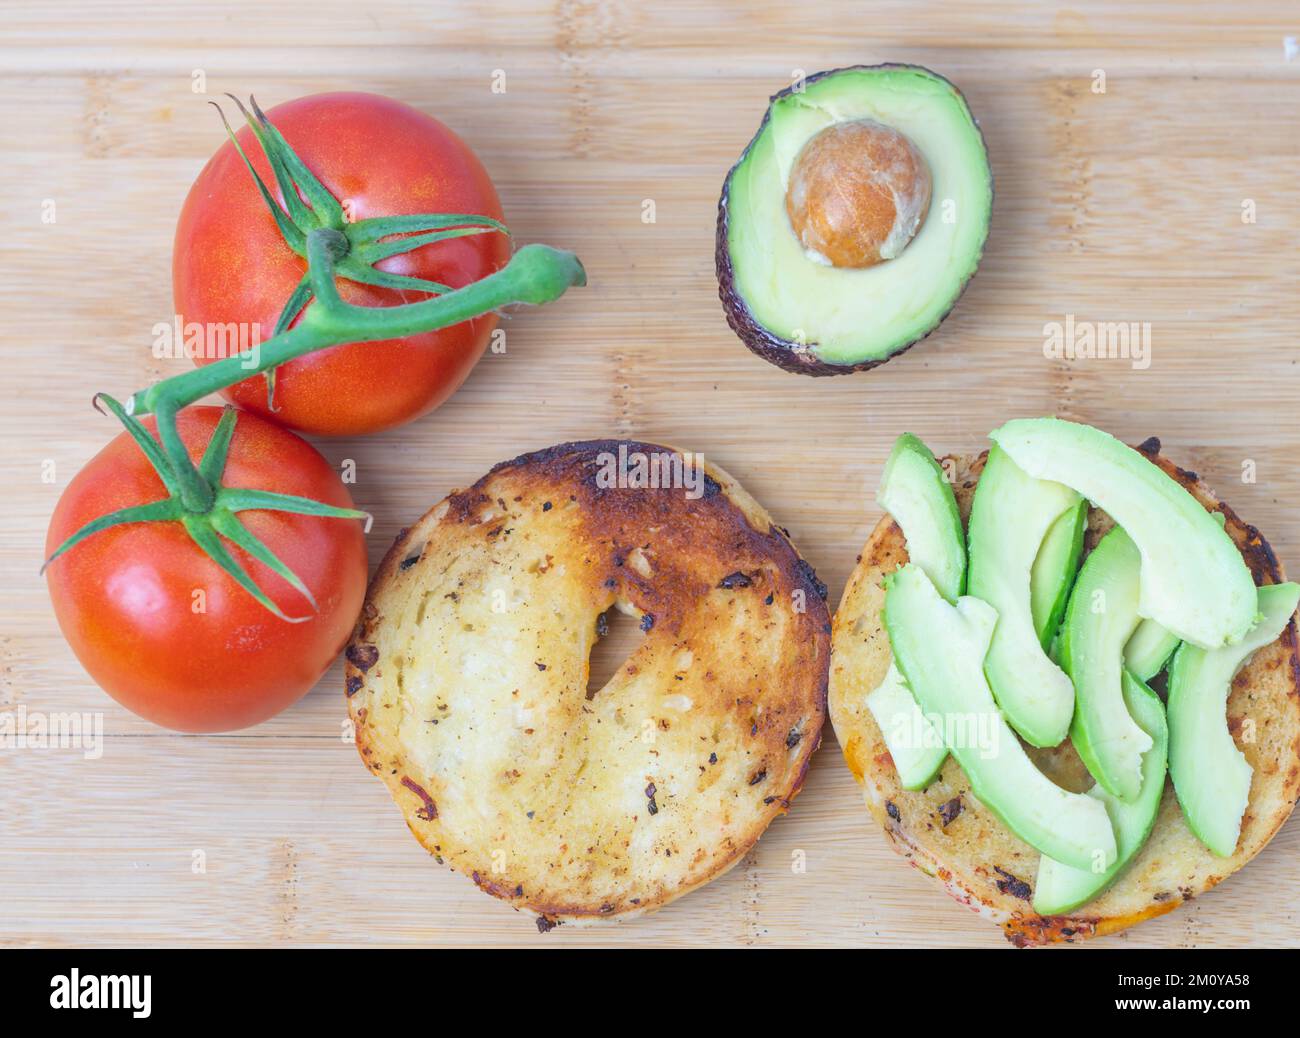 Top down toasted bagel sandwich with egg and vegetables Stock Photo